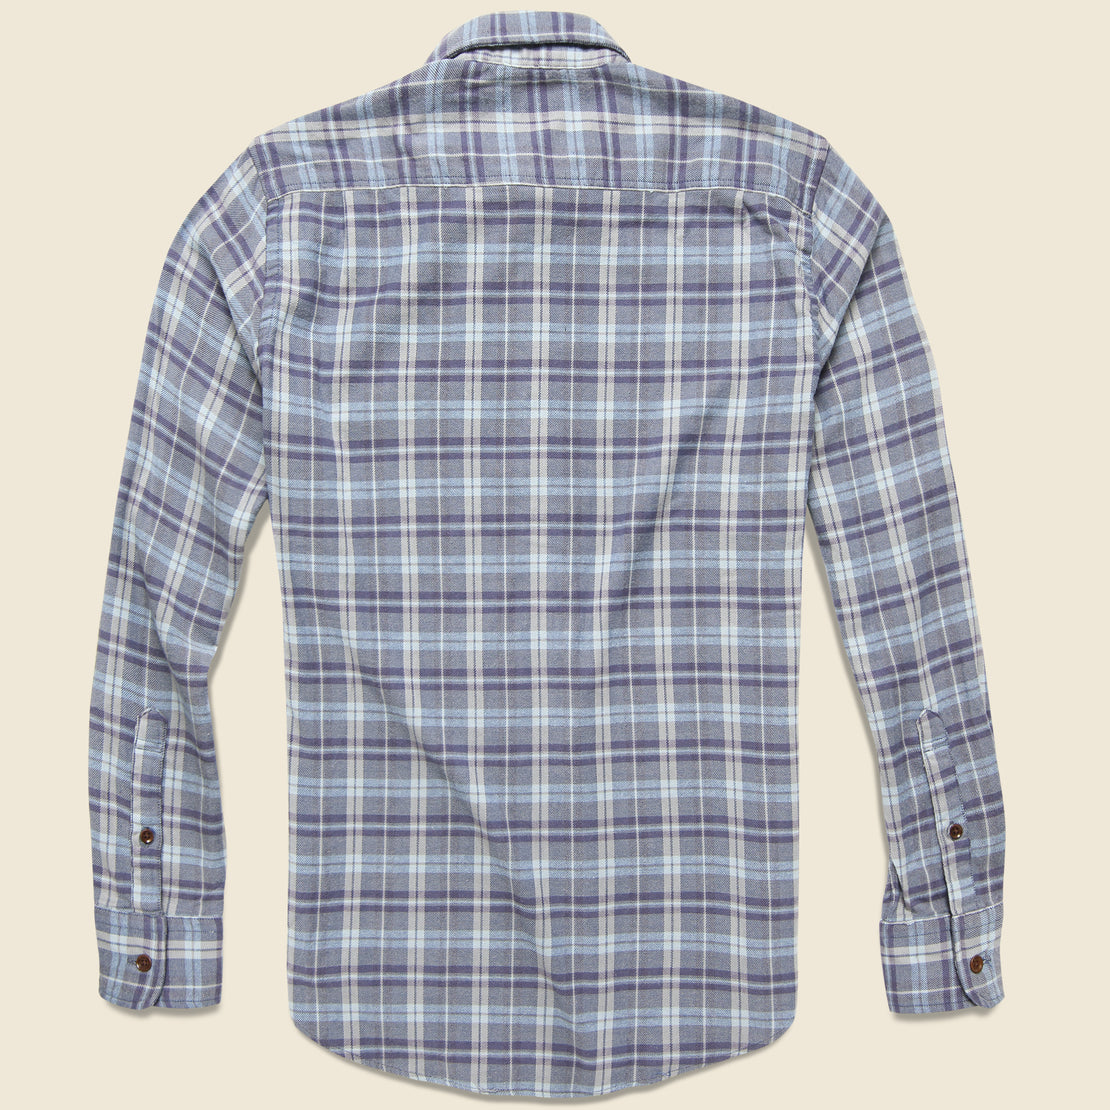 Stretch Seaview Shirt - Dark Blue/Grey - Faherty - STAG Provisions - Tops - L/S Woven - Plaid